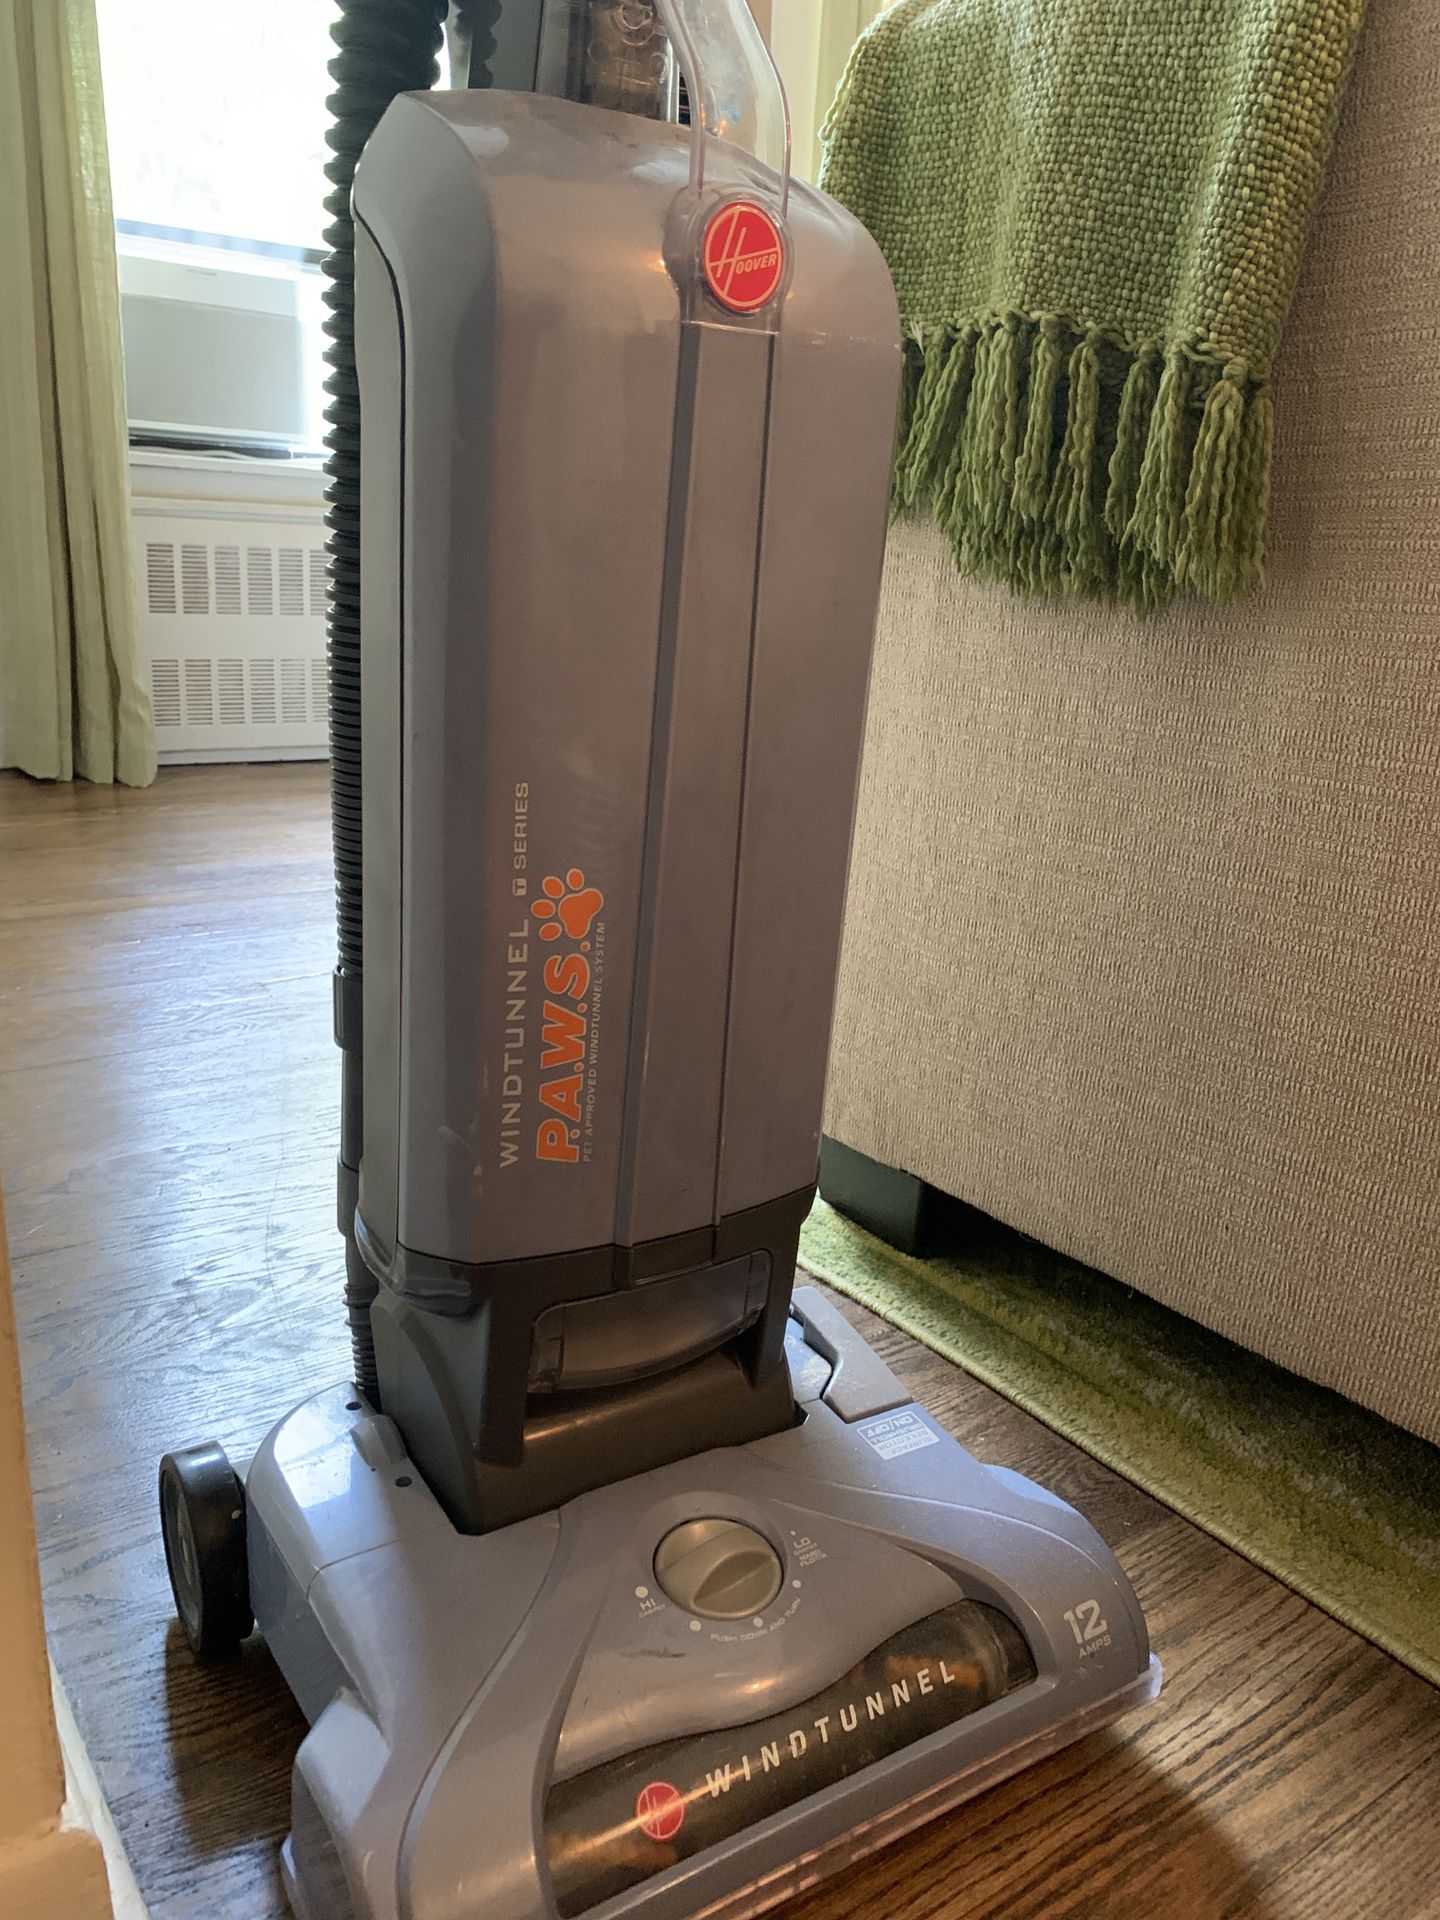 Hoover Windtunnel Vacuum - Tseries Pet Bagged Upright